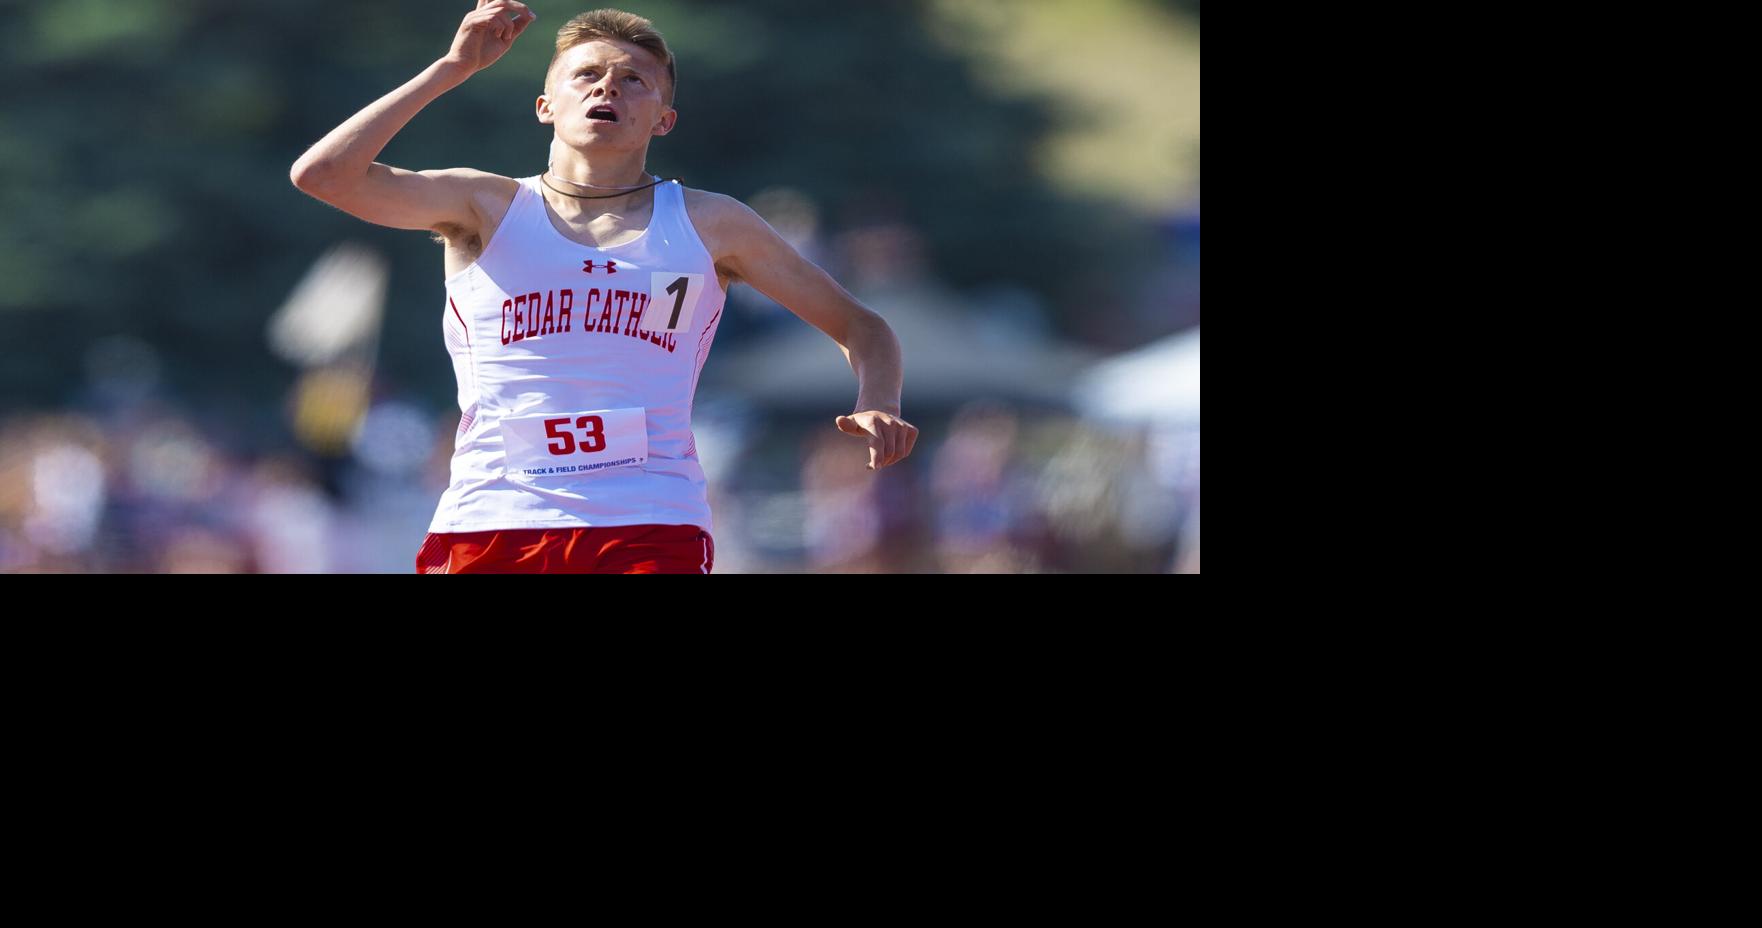 Check out results from Day 2 of the Class C and D state track and field meet